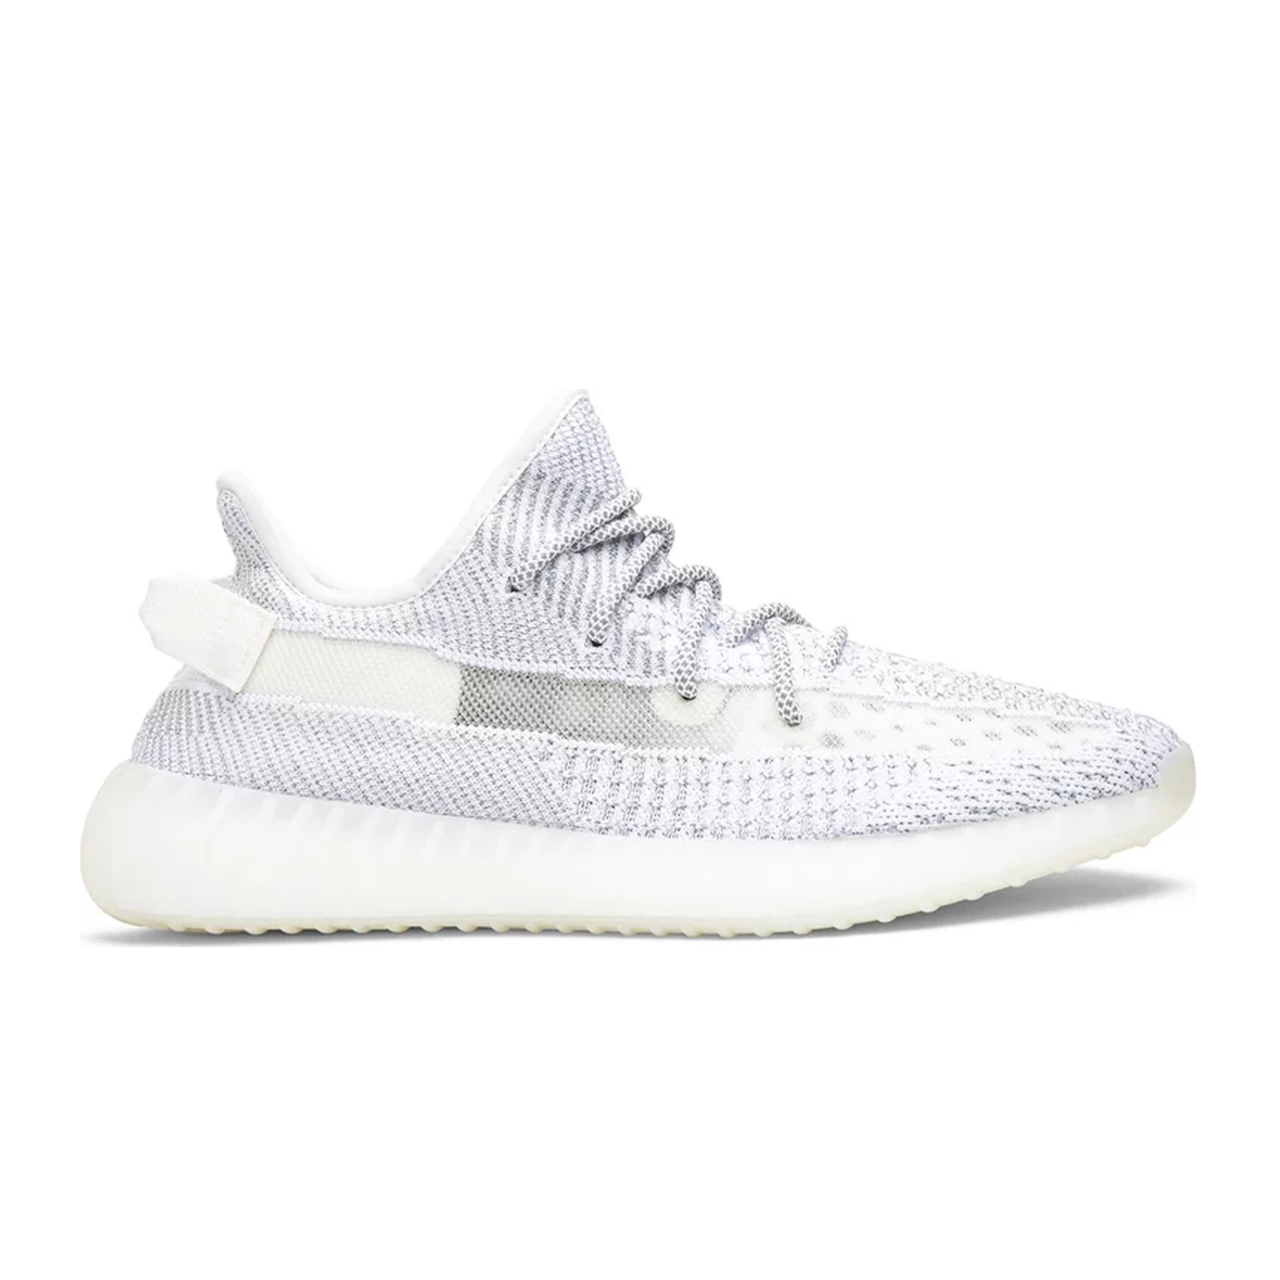 Yeezy Boost 350 V2 Static (Non-reflective)